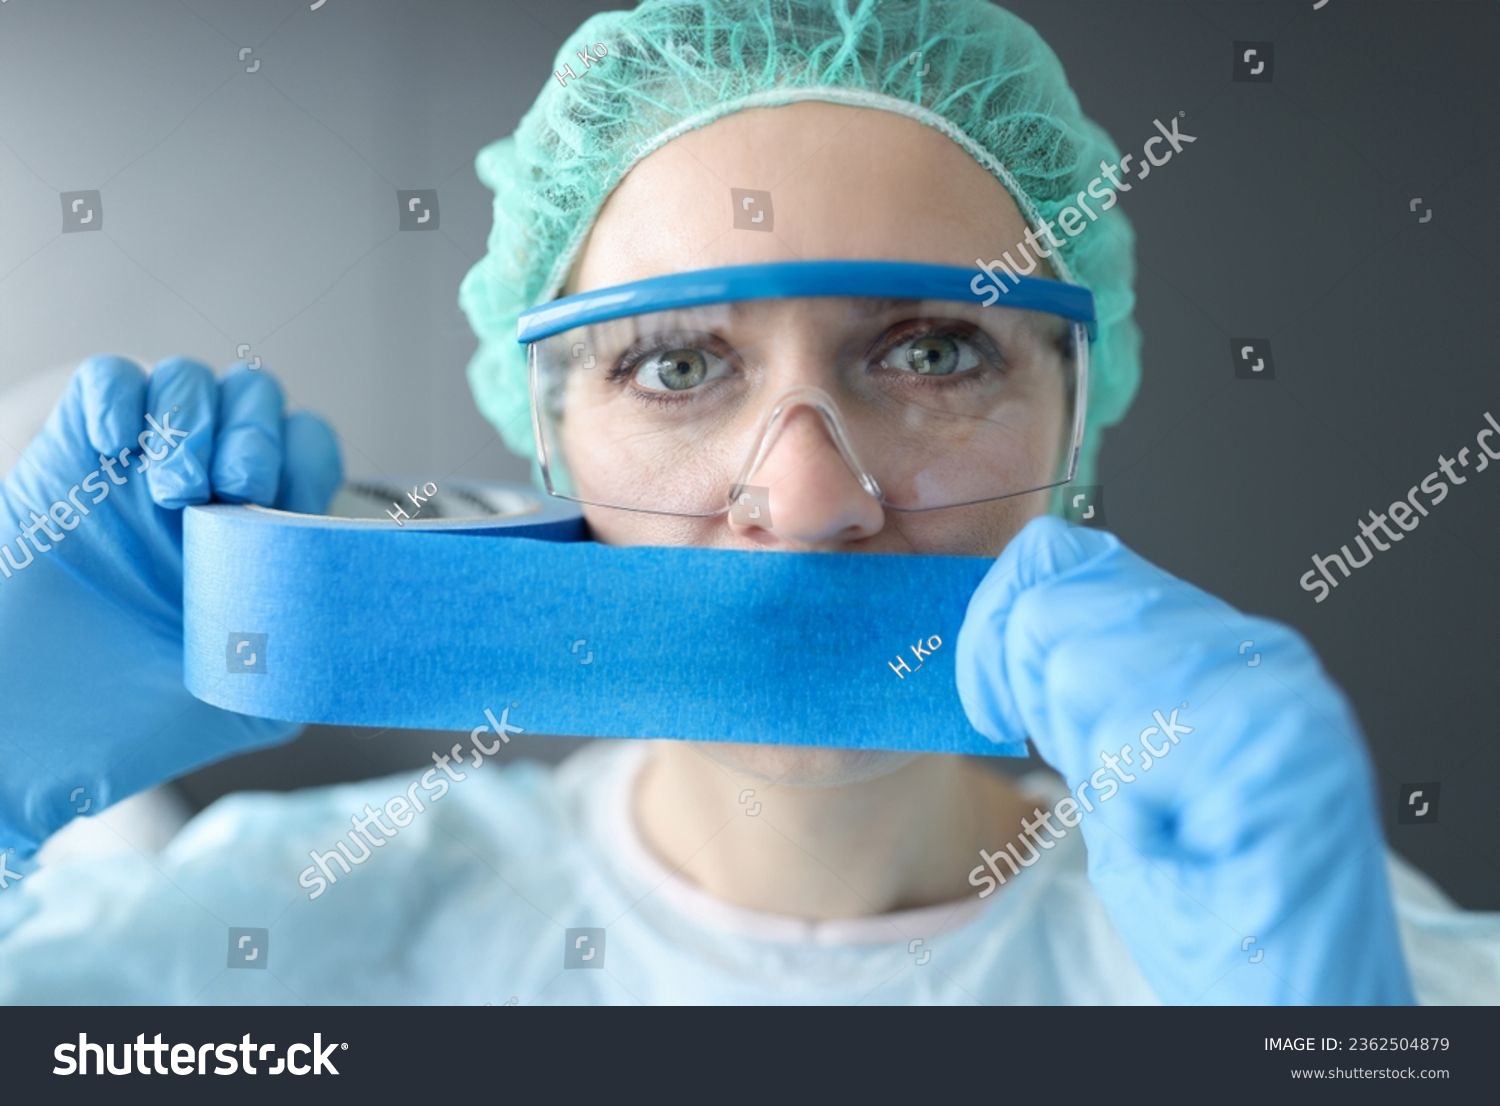 Woman doctor sealing her mouth with blue tape. Medical secrecy concept #2362504879